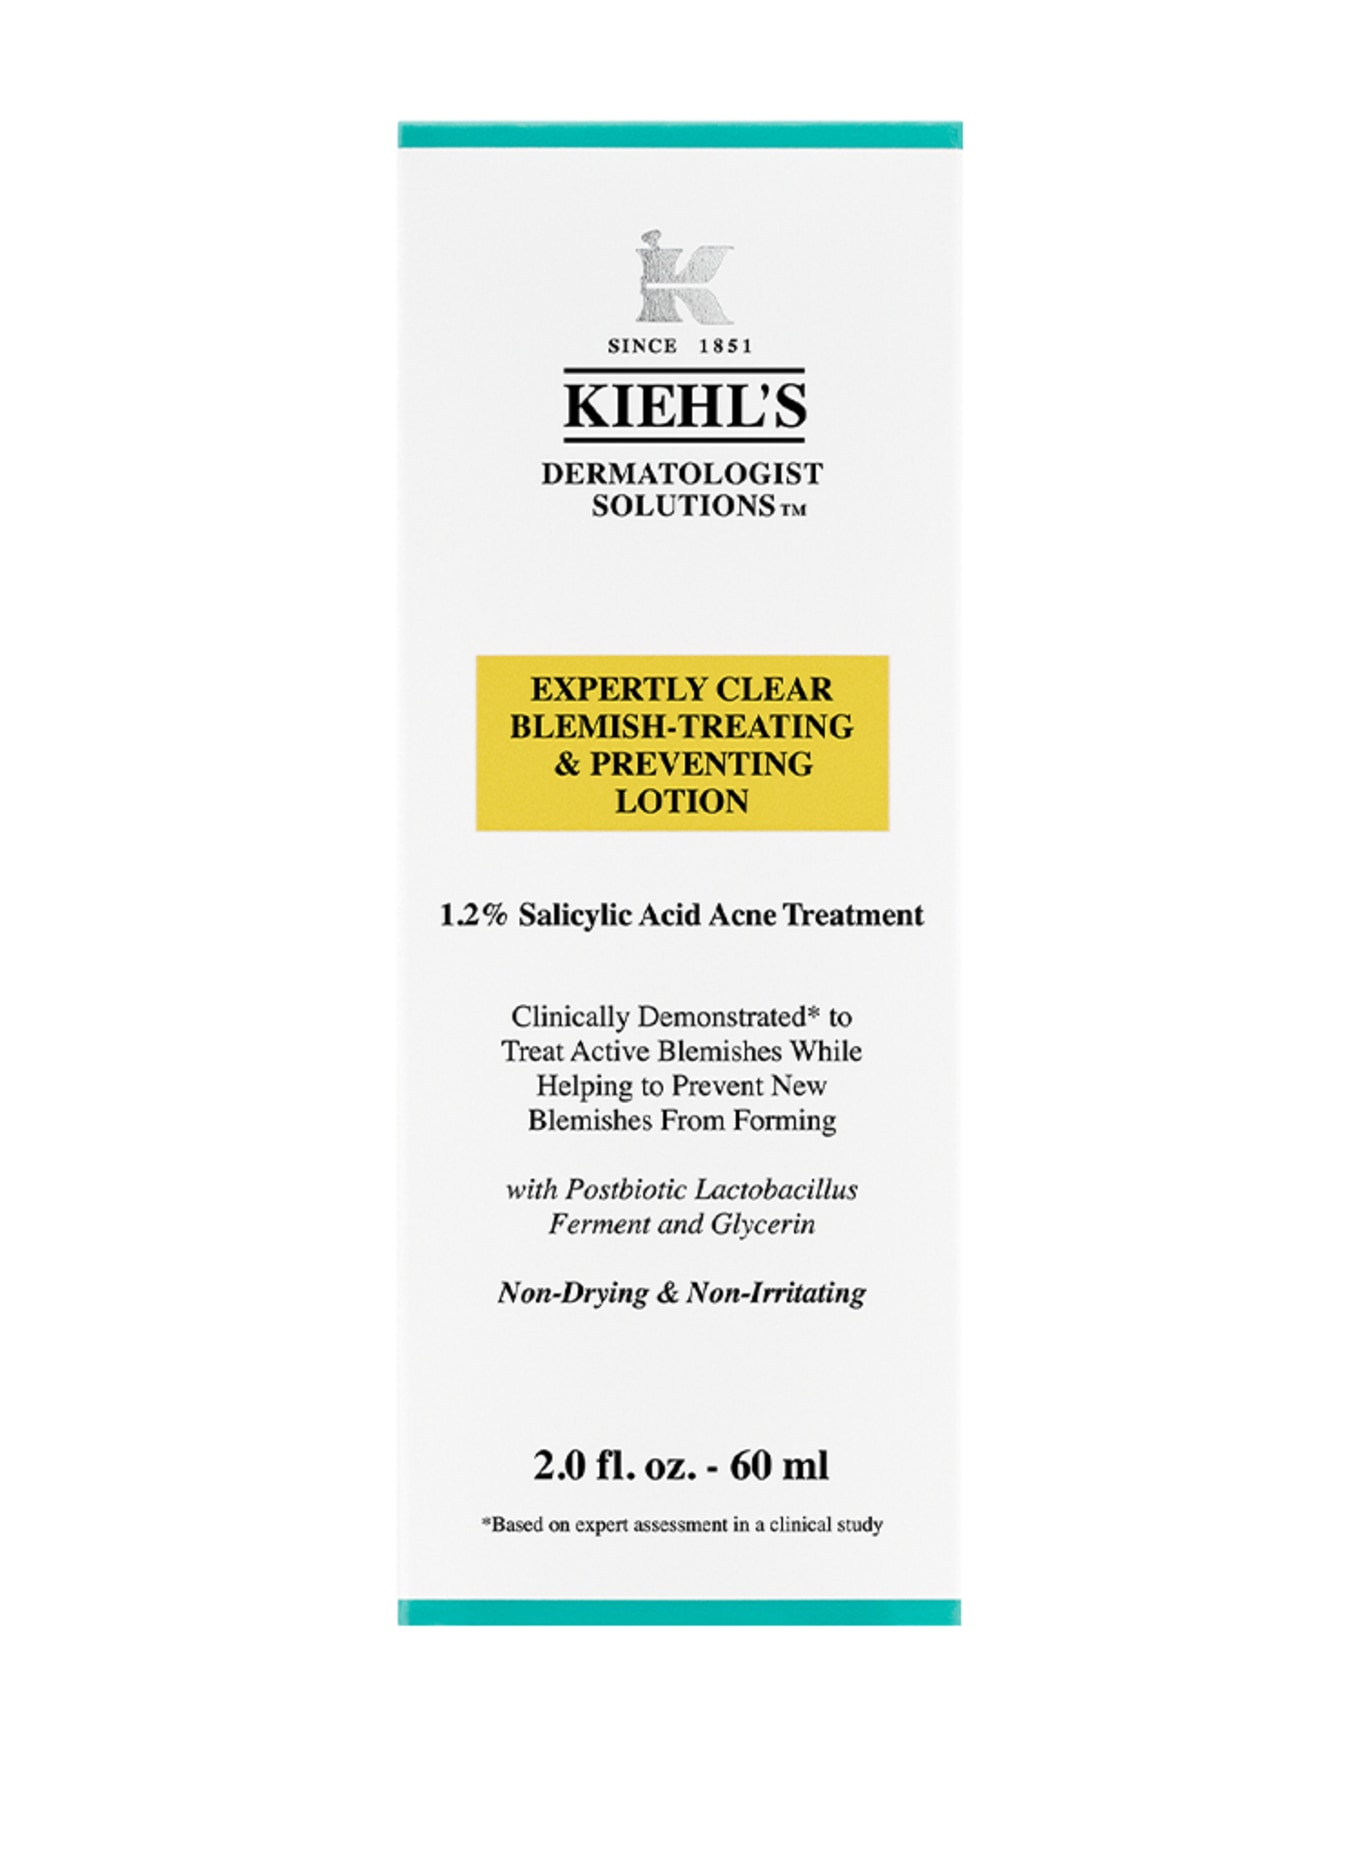 Kiehl's EXPERTLY CLEAR BLEMISH TREATING & PREVENTING LOTION (Bild 2)